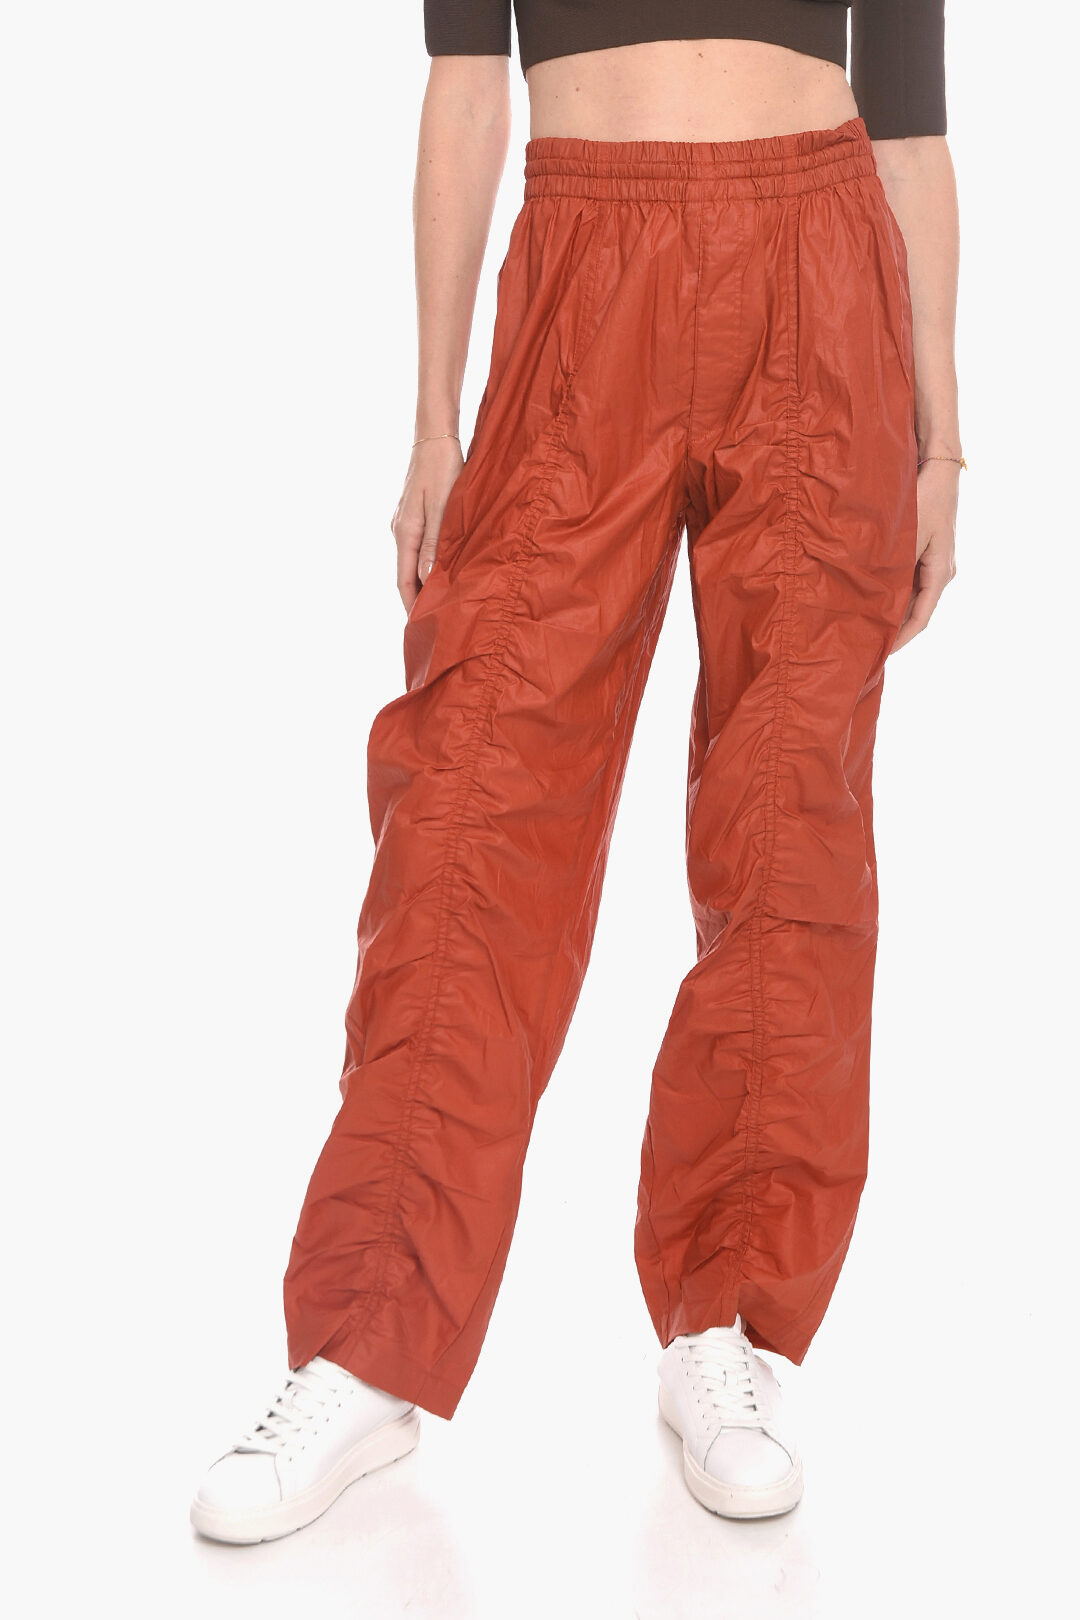 Misspap Leather Look Ruched Leg Trousers | Boohoo UK